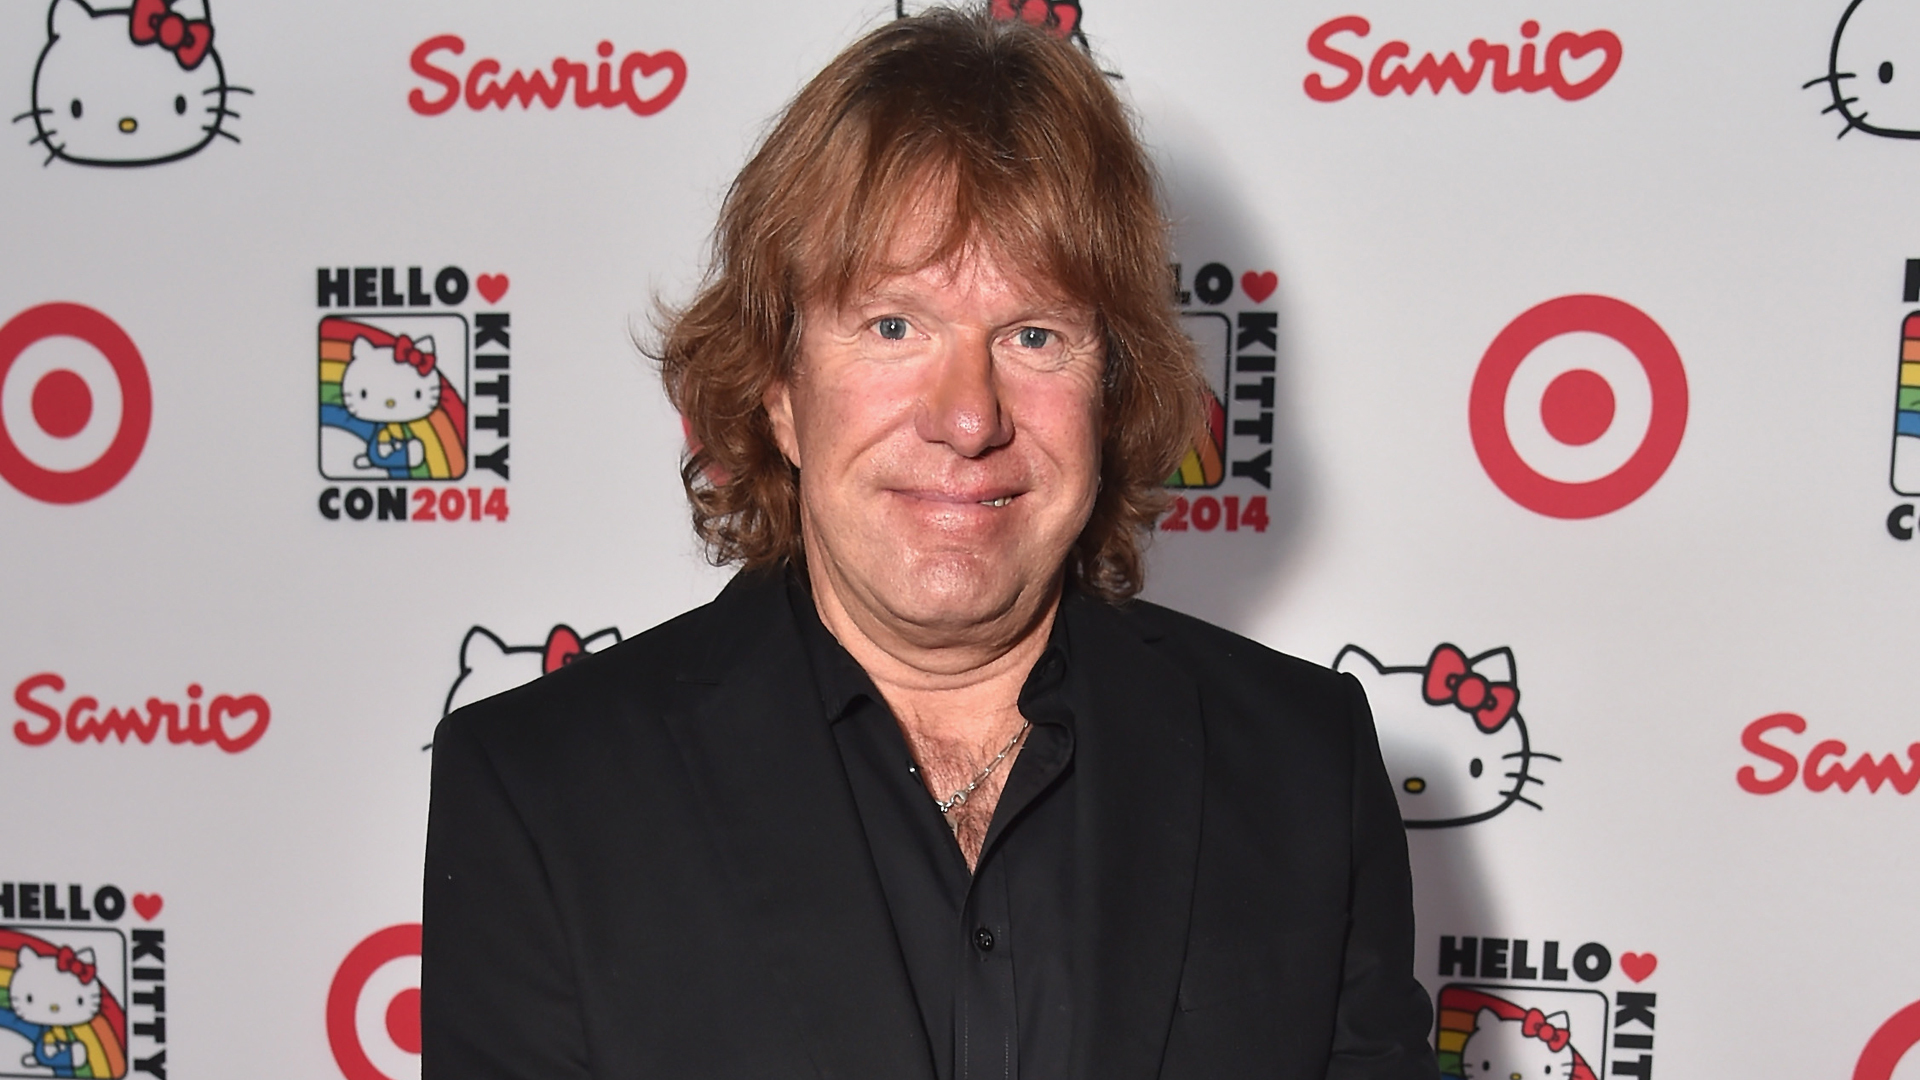 Keith Emerson of Emerson, Lake & Palmer Dies of Possible Suicide at 71: Police